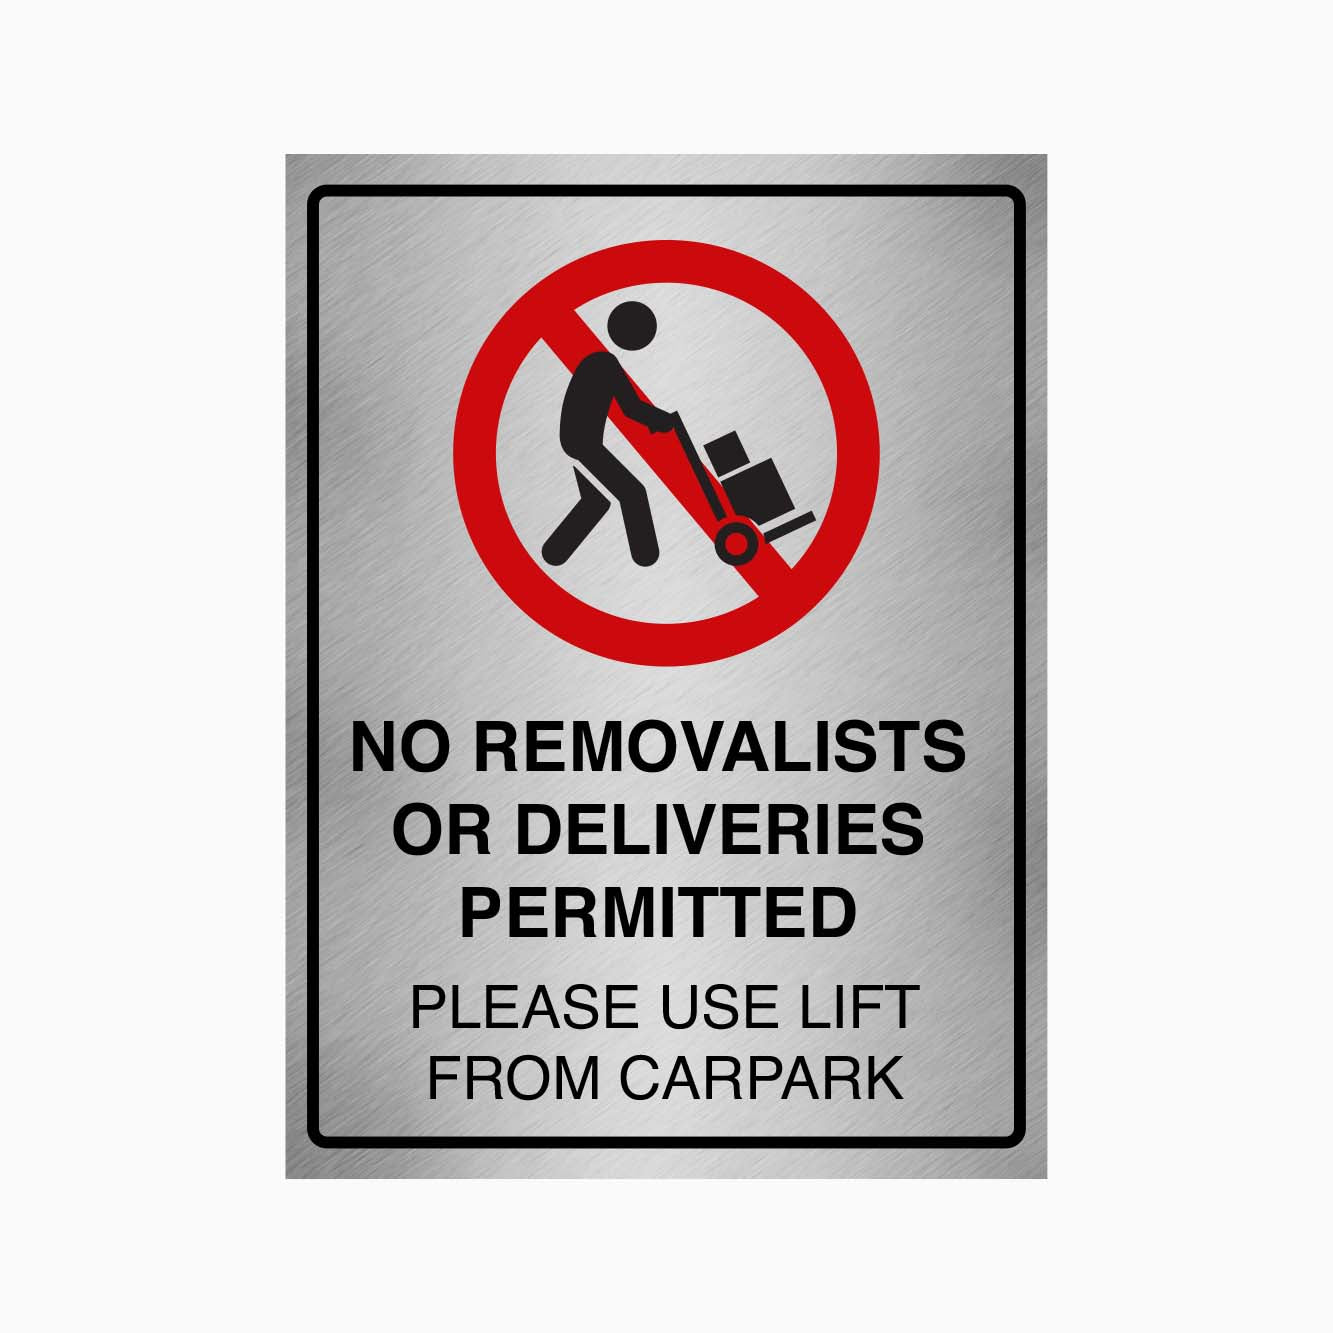 NO REMOVALISTS OR DELIVERIES PERMITTED SIGN - PLEASE USE LIFT FROM CAR PARK SIGN - GET SIGNS